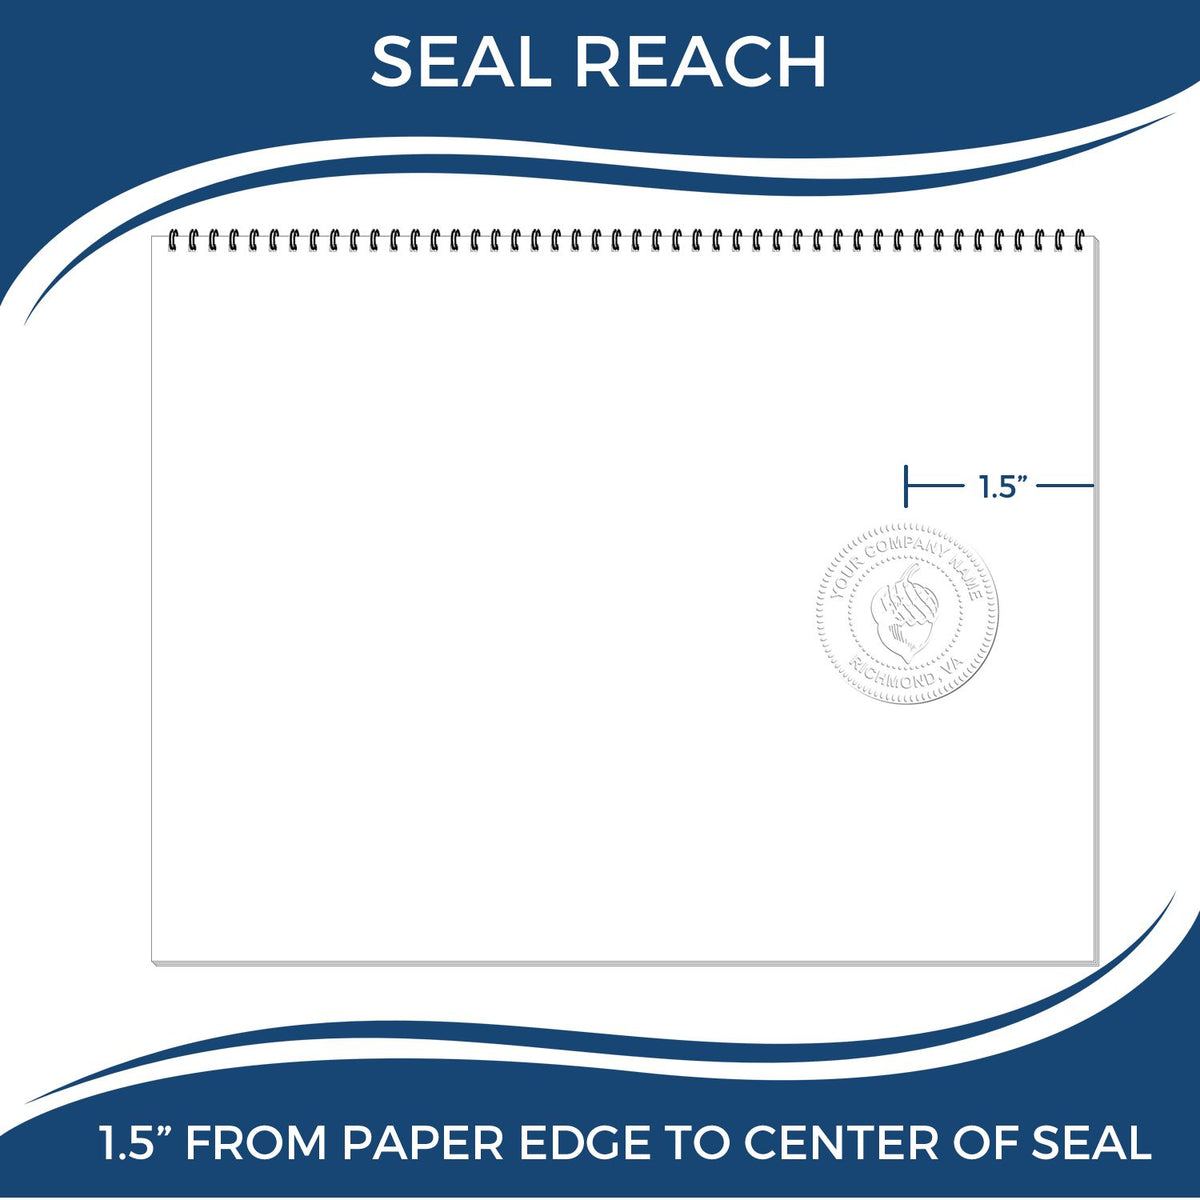 An infographic showing the seal reach which is represented by a ruler and a miniature seal image of the Kansas Desk Architect Embossing Seal